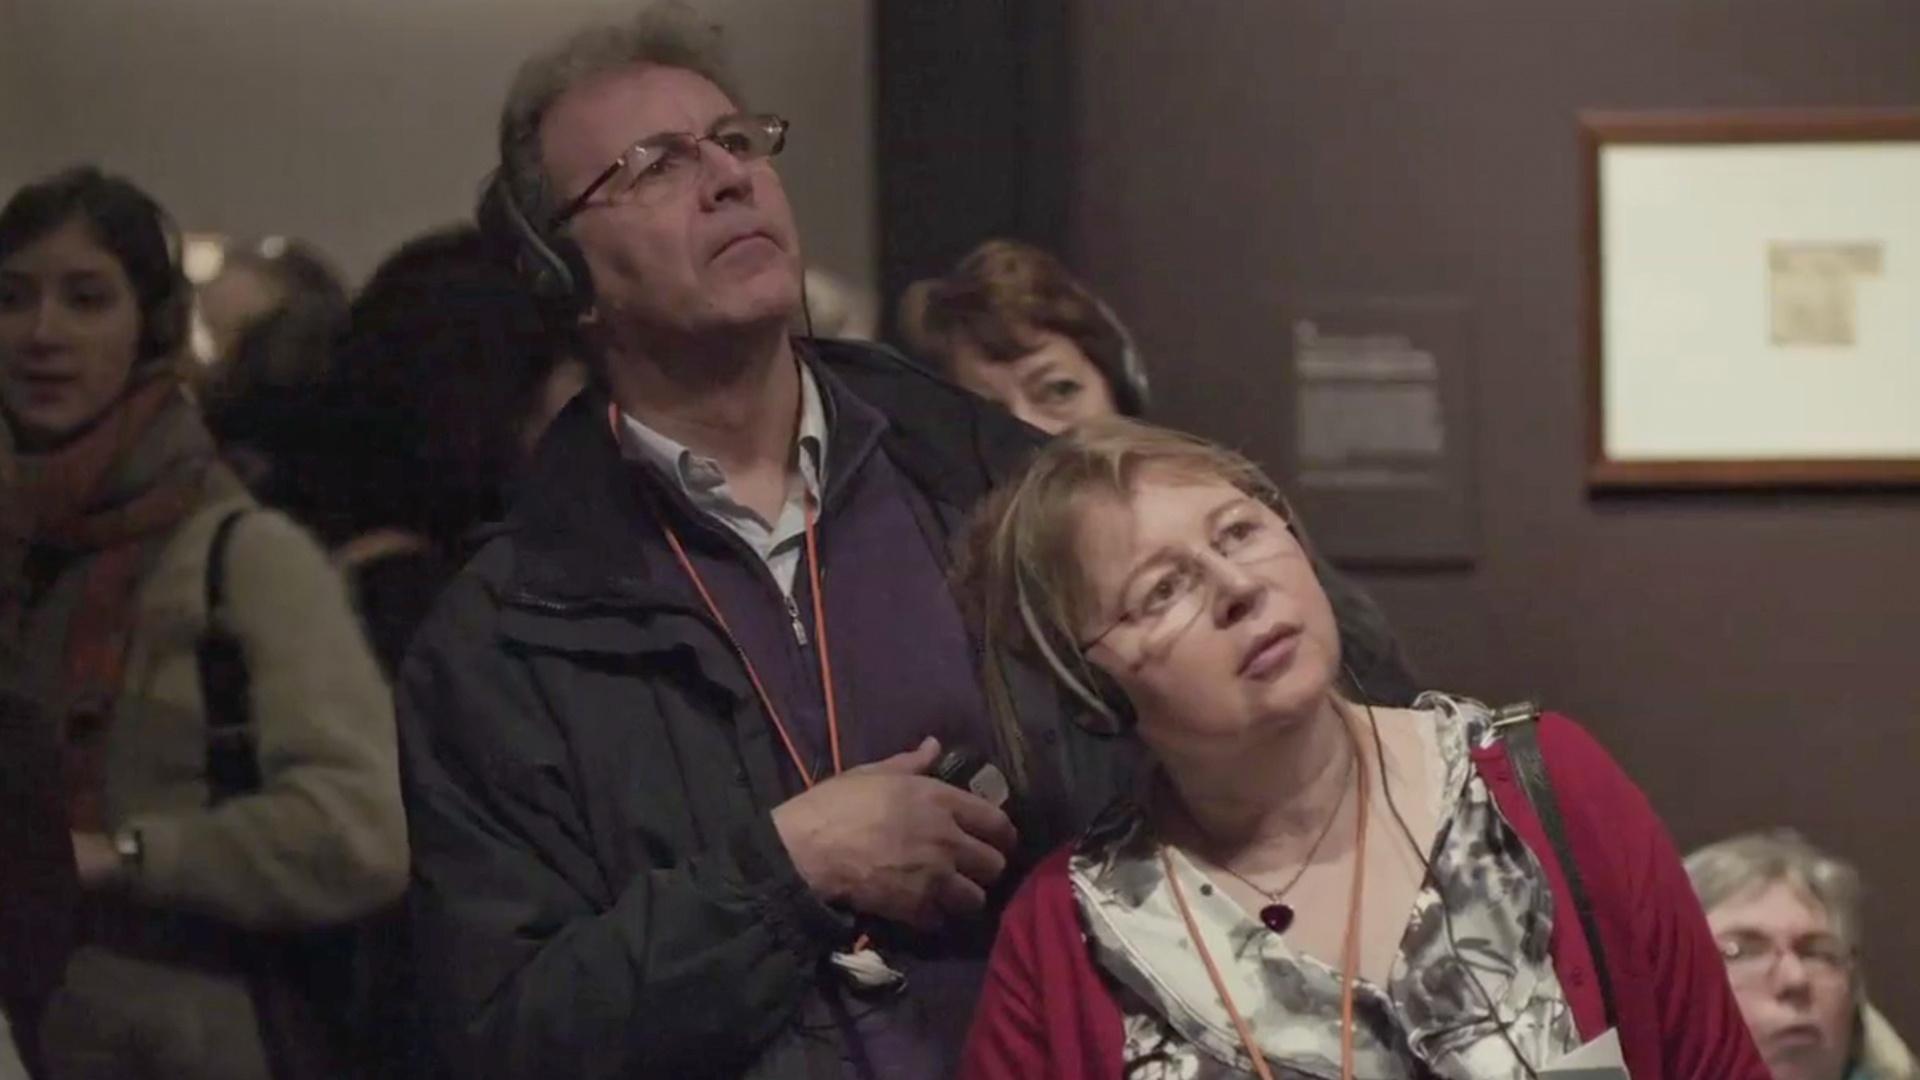 Still from Frederick Wiseman's film 'National Gallery'